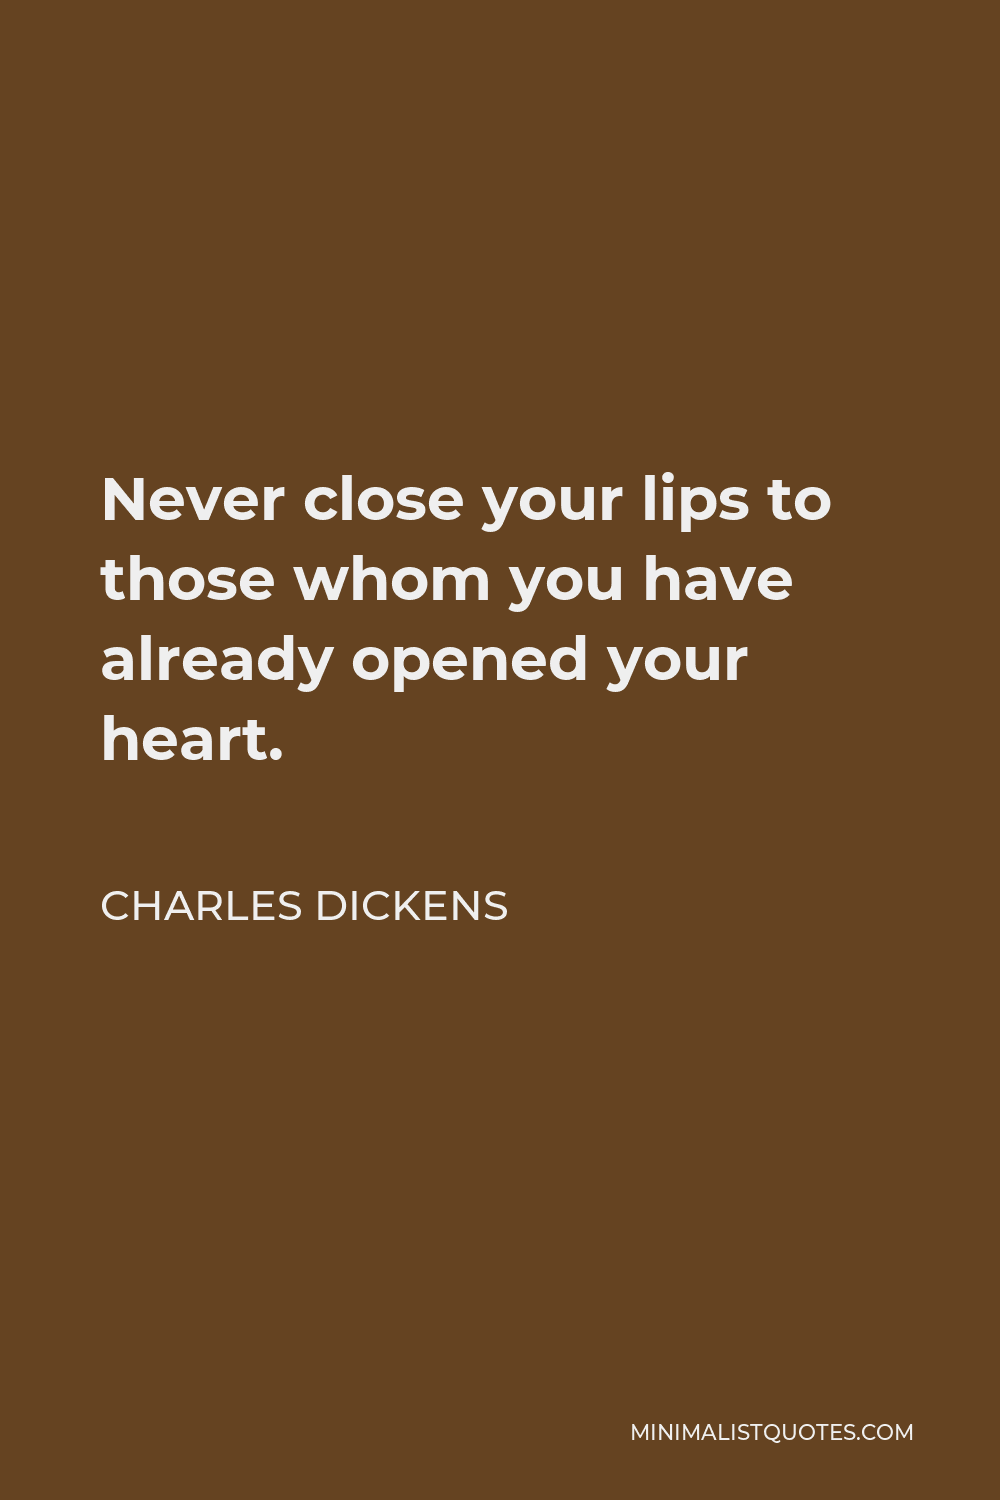 NEW Famous Person Classroom POSTER Never Close Your Lips Charles Dickens 